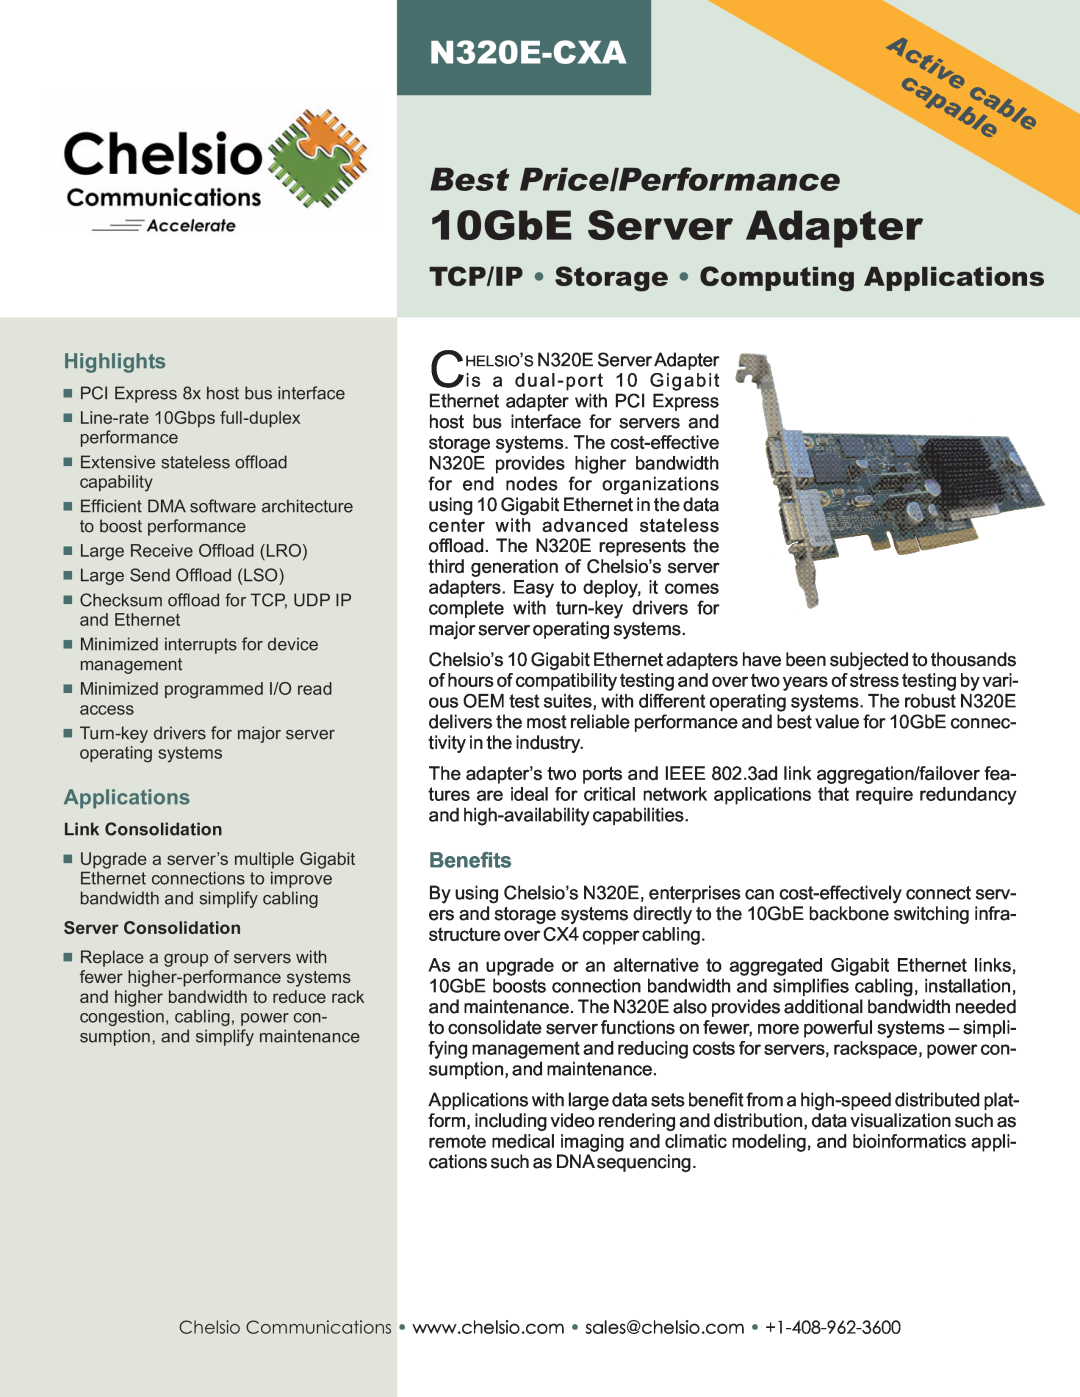 Chelsio Communications N320E-CXA manual Highlights, Applications, Benefits, 10GbE Server Adapter, Best Price/Performance 